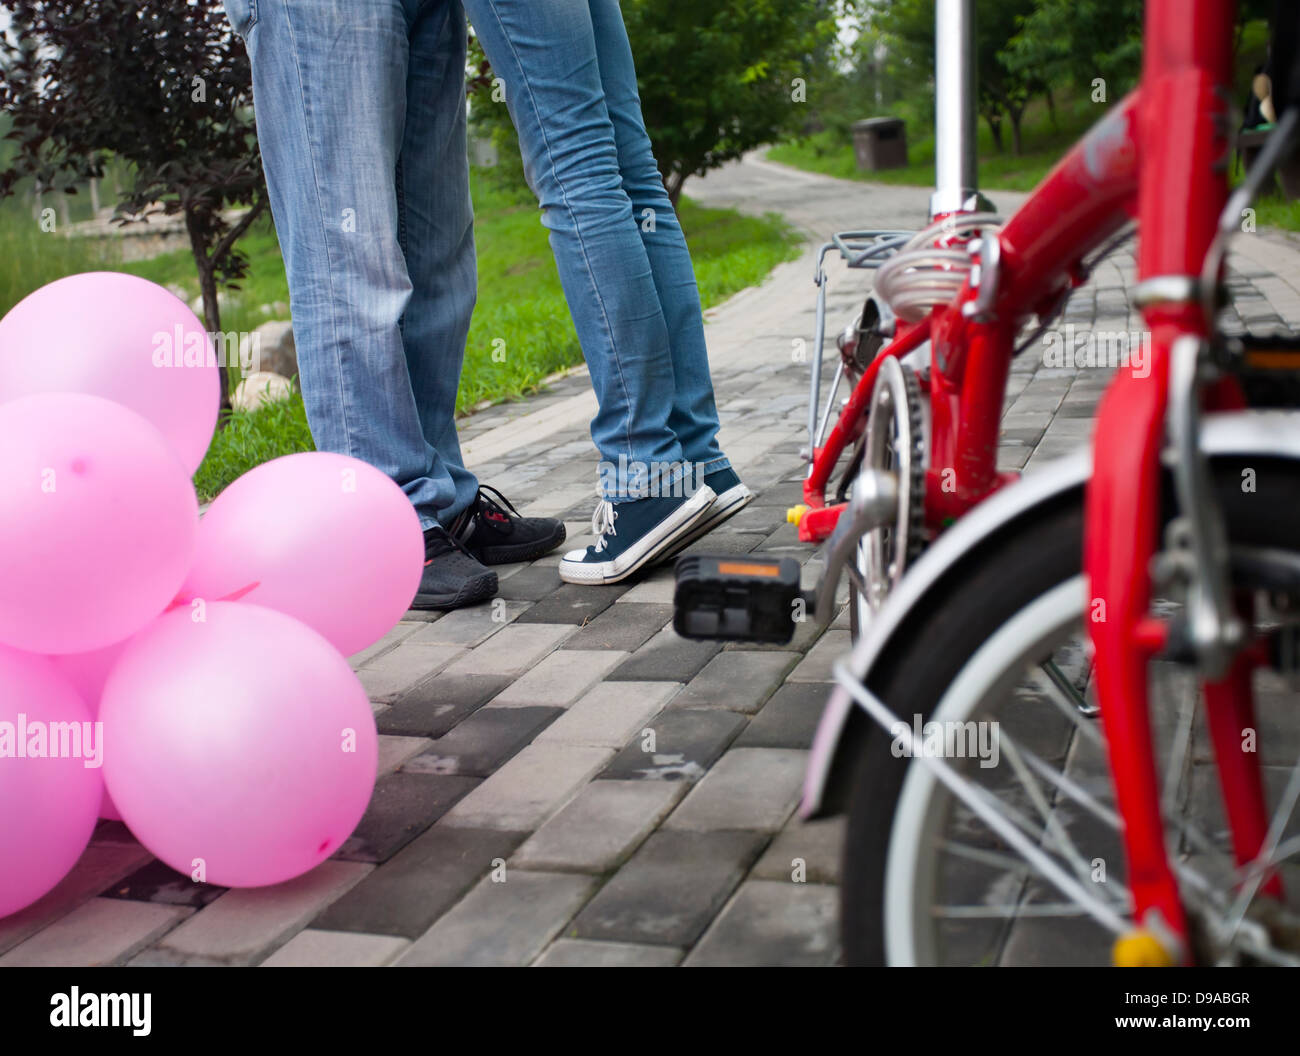 Romantic kissing with balloon and bike as foreground Stock Photo